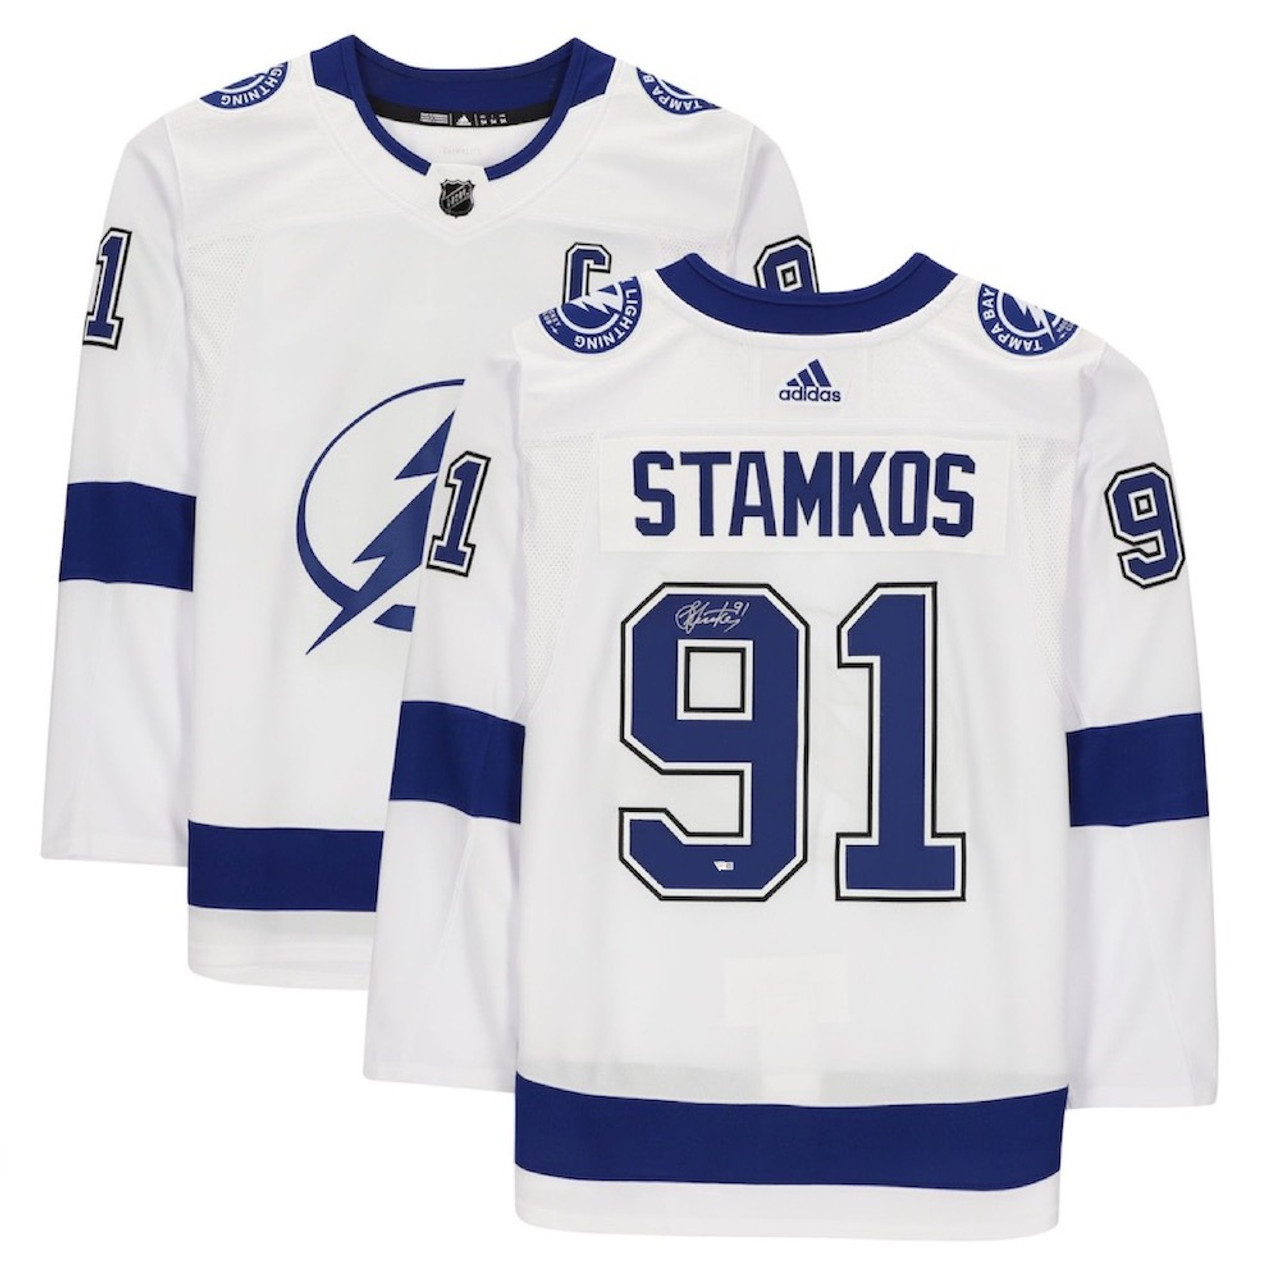 STEVEN STAMKOS Autographed Lightning Authentic Adidas White Jersey FANATICS  - Game Day Legends